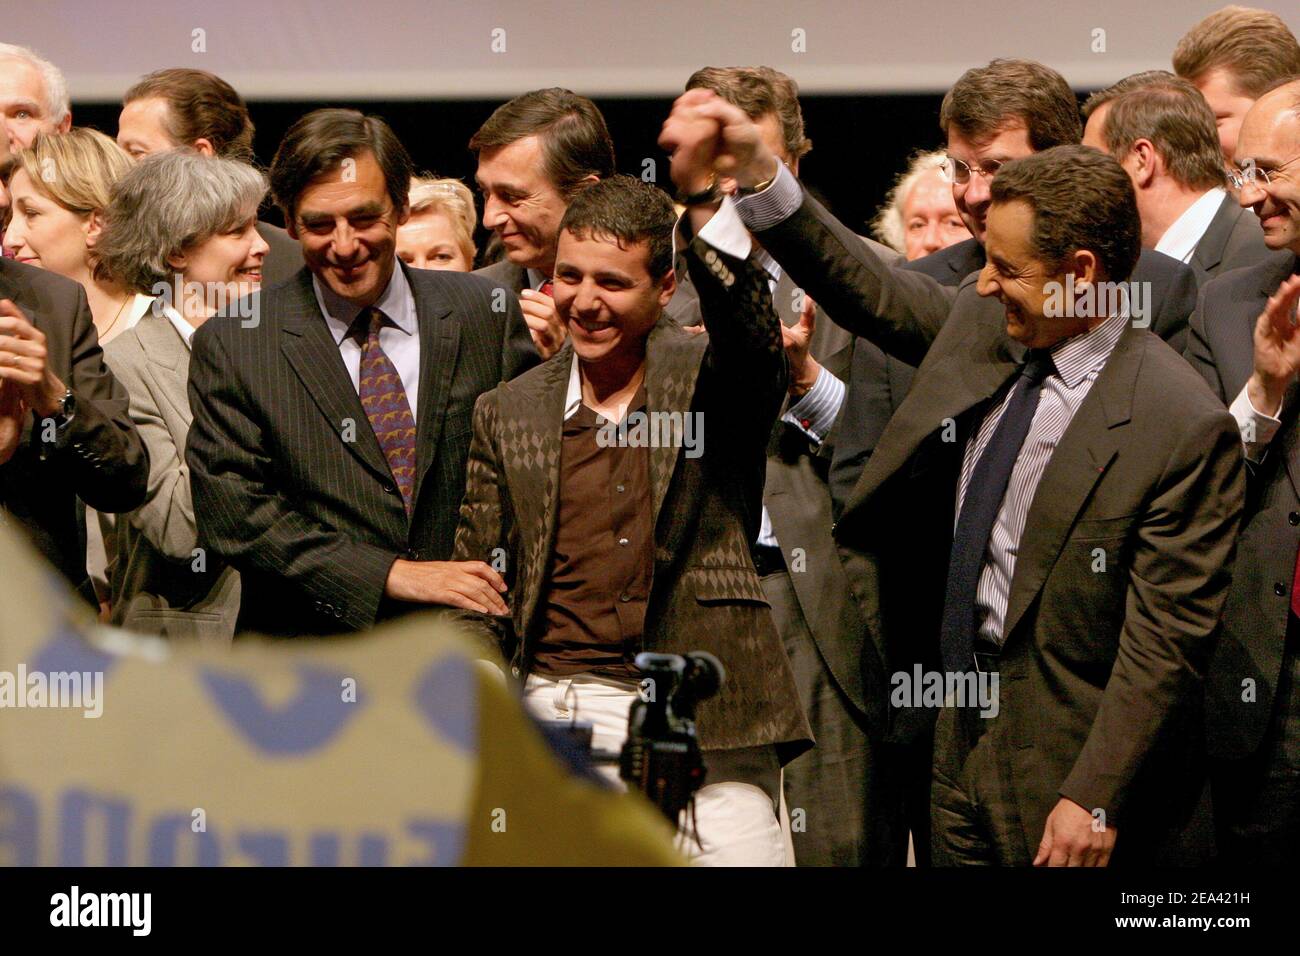 French education Minister Francois Fillon, singer Faudel and Governing UMP party president Nicolas Sarkozy attend a meeting of UMP party for the 'Yes' vote for the upcoming European Constitution referendum vote next May 29, at the Palais des Sports, in Paris, France, on May 12, 2005. Photo by Mousse/ABACA. Stock Photo